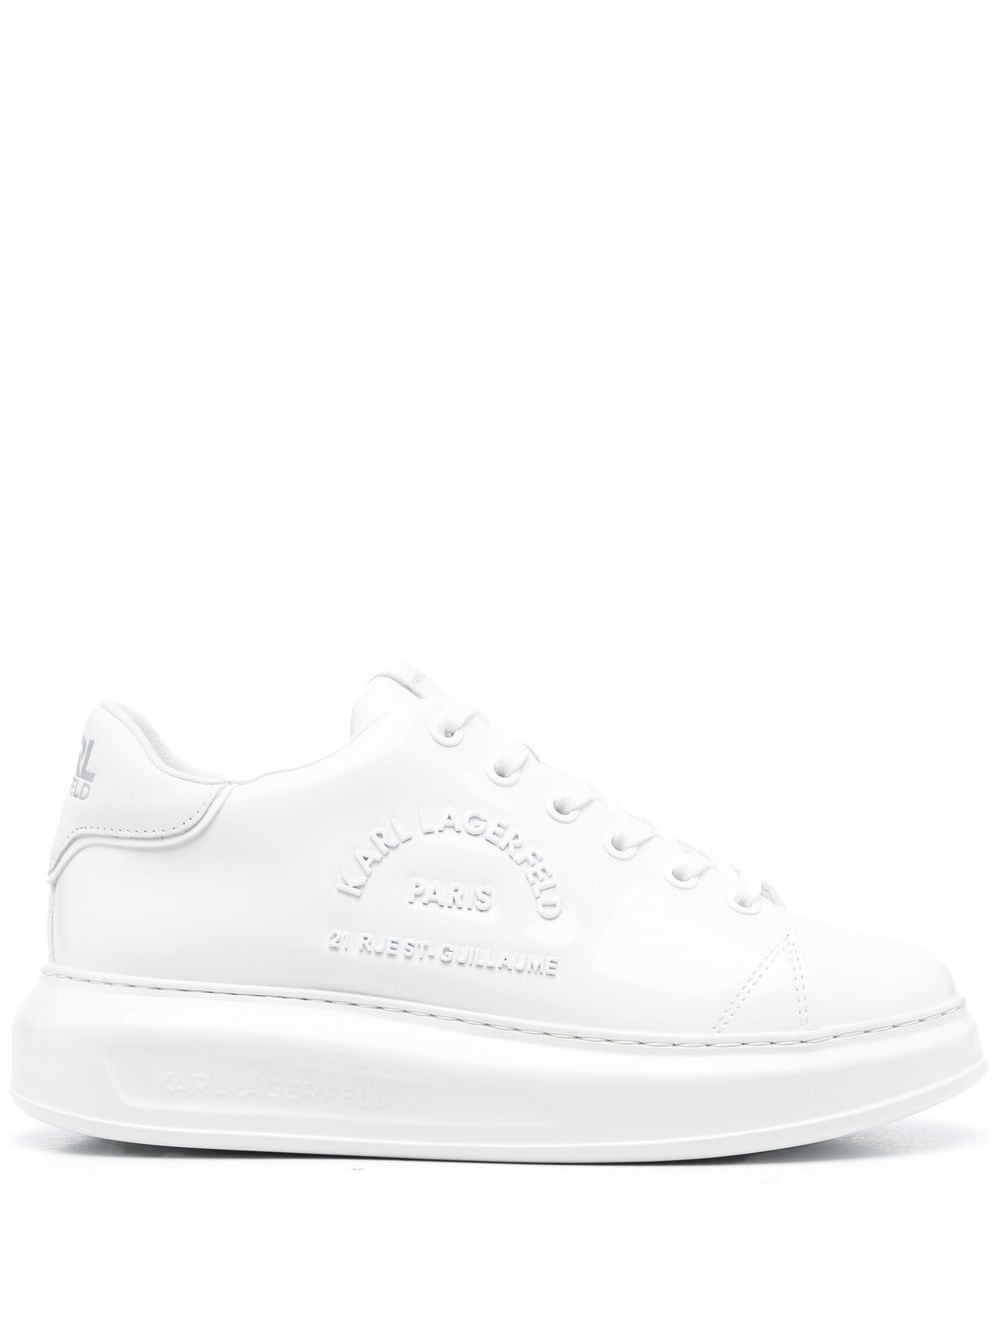 KARL LAGERFELD RUE ST GUILLAUME LOW-TOP LEATHER SNEAKERS